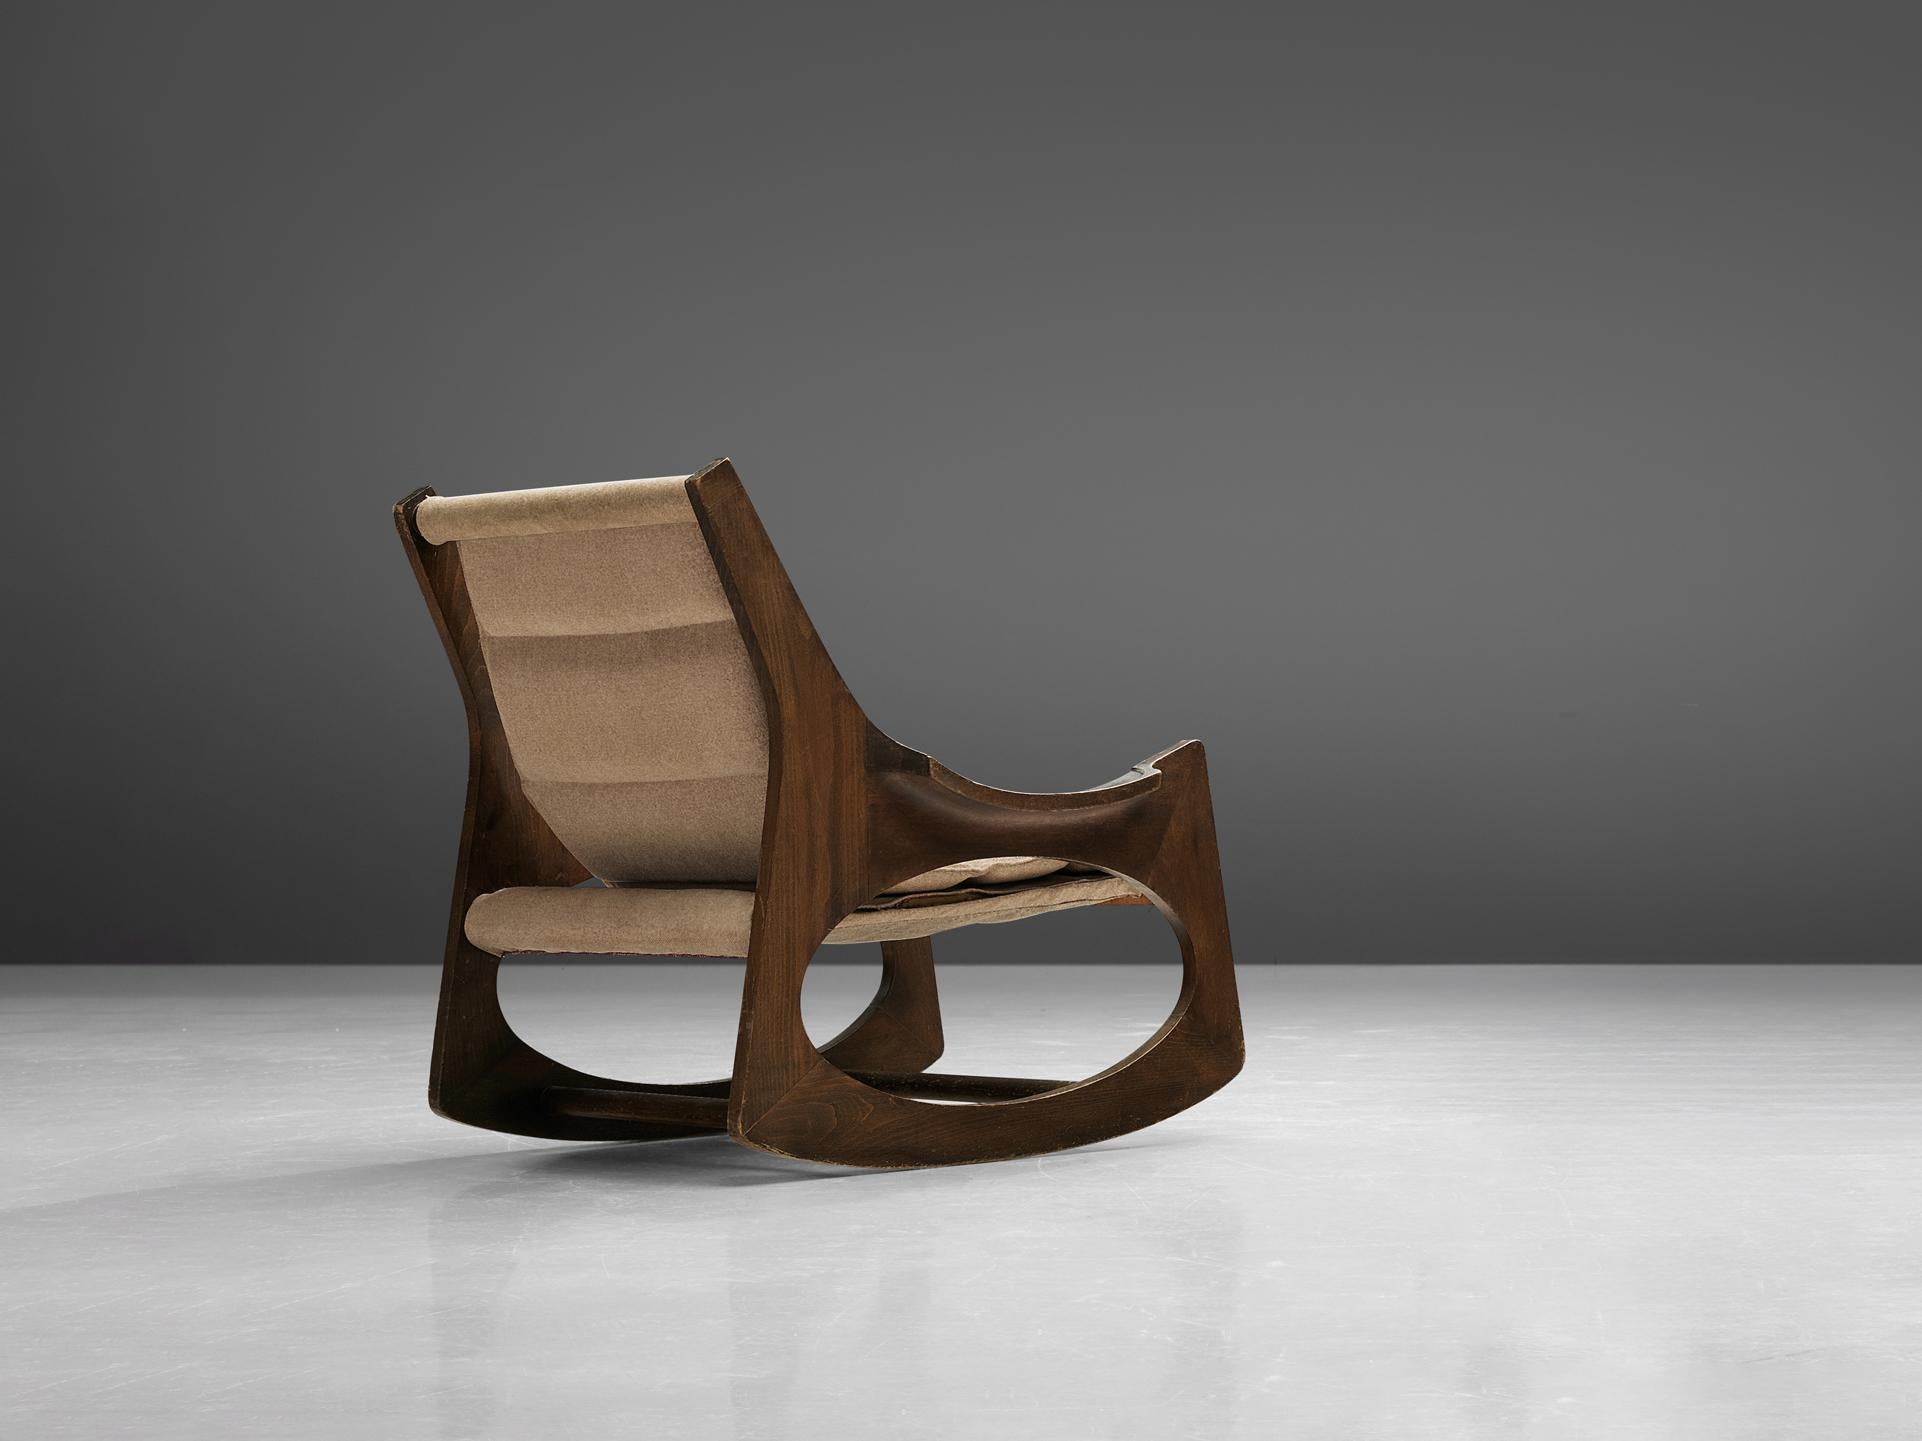 Jordi Vilanova i Bosch,' Tartera' rocking chair, boxwood, beech, and fabric, Spain, design 1966, manufacture 1960s.

This wonderful rocking chair is made of two symmetrical side pieces, which integrate the structure of the backrest, arms, legs and